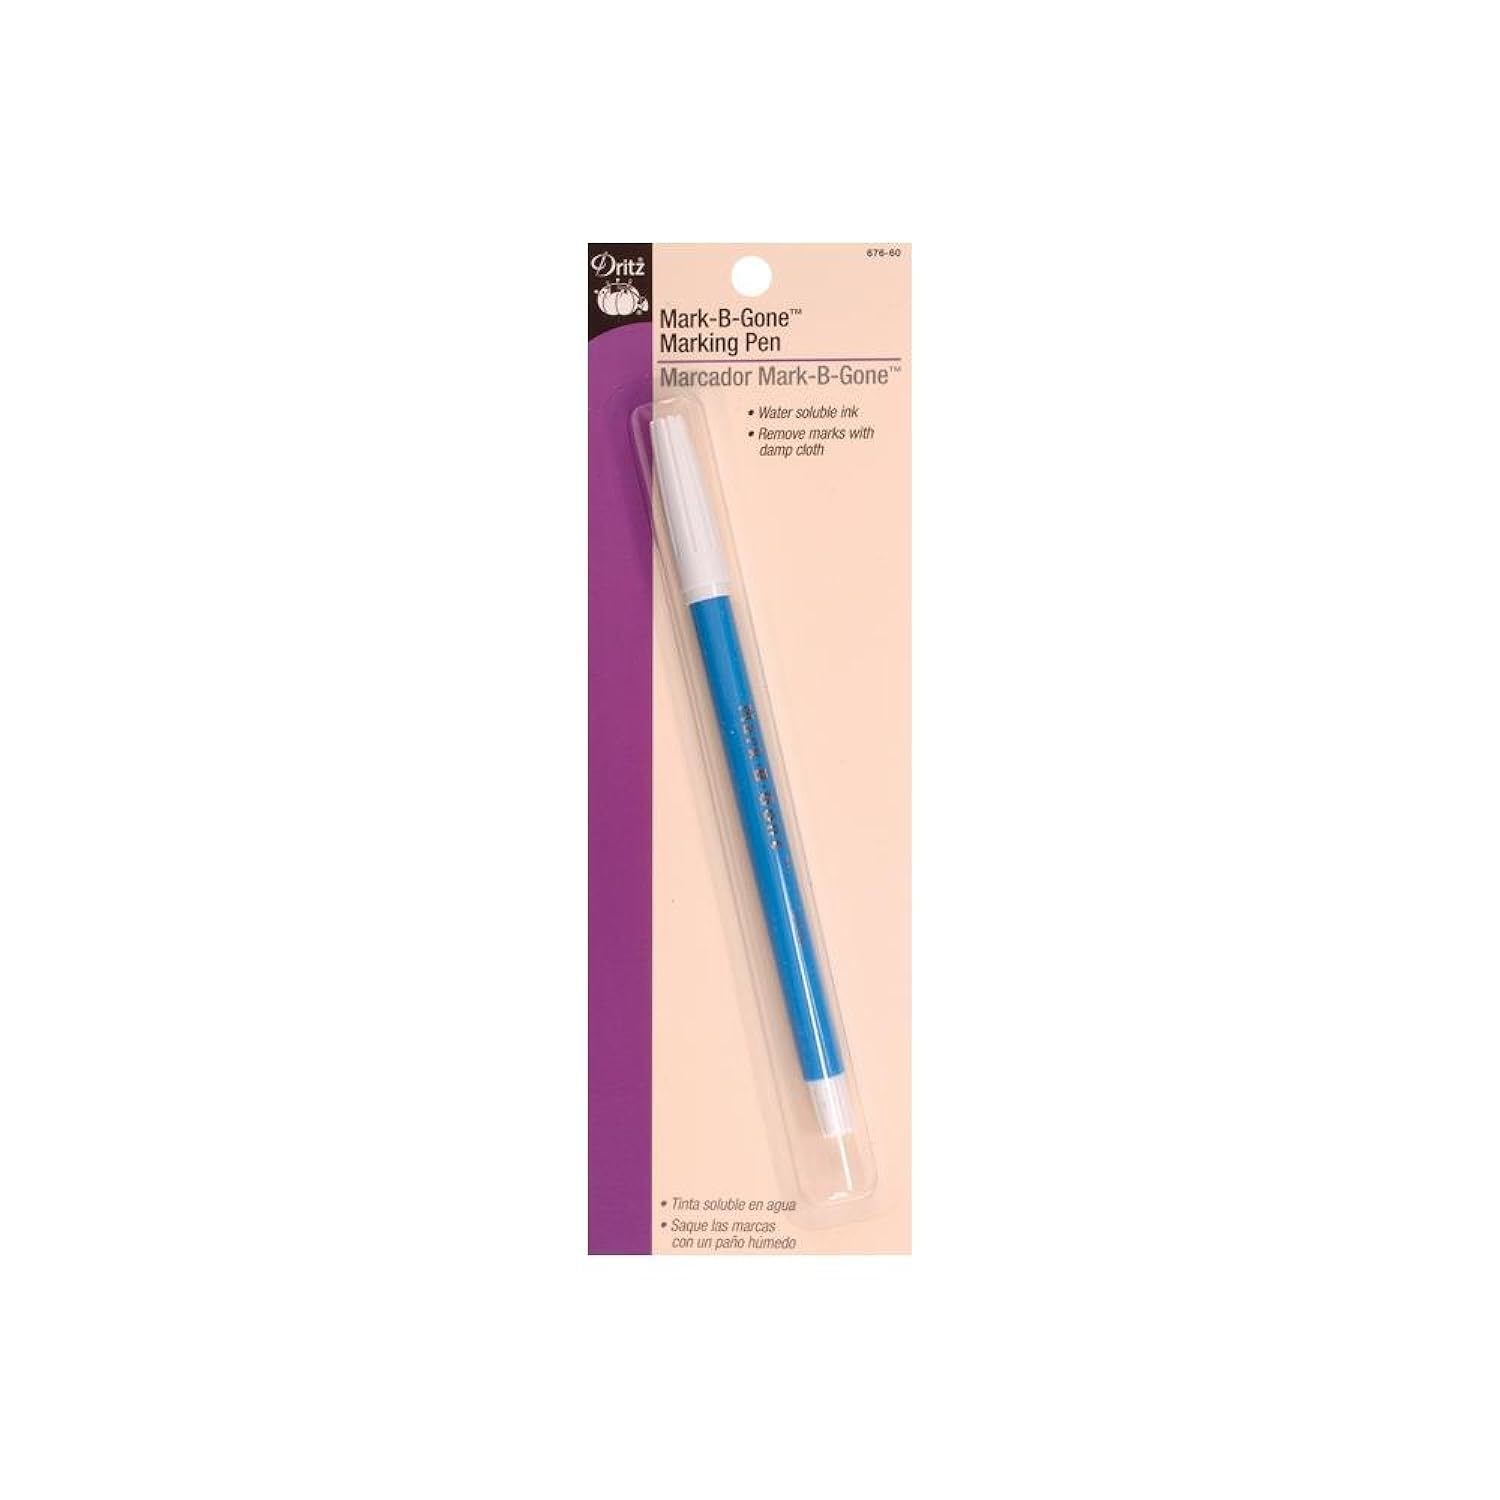 Primary image for Dritz 676-60 Mark-B-Gone Marking Pen, Blue, 8.75 x 2.88 x 0.5, 1 Count (Pack of 